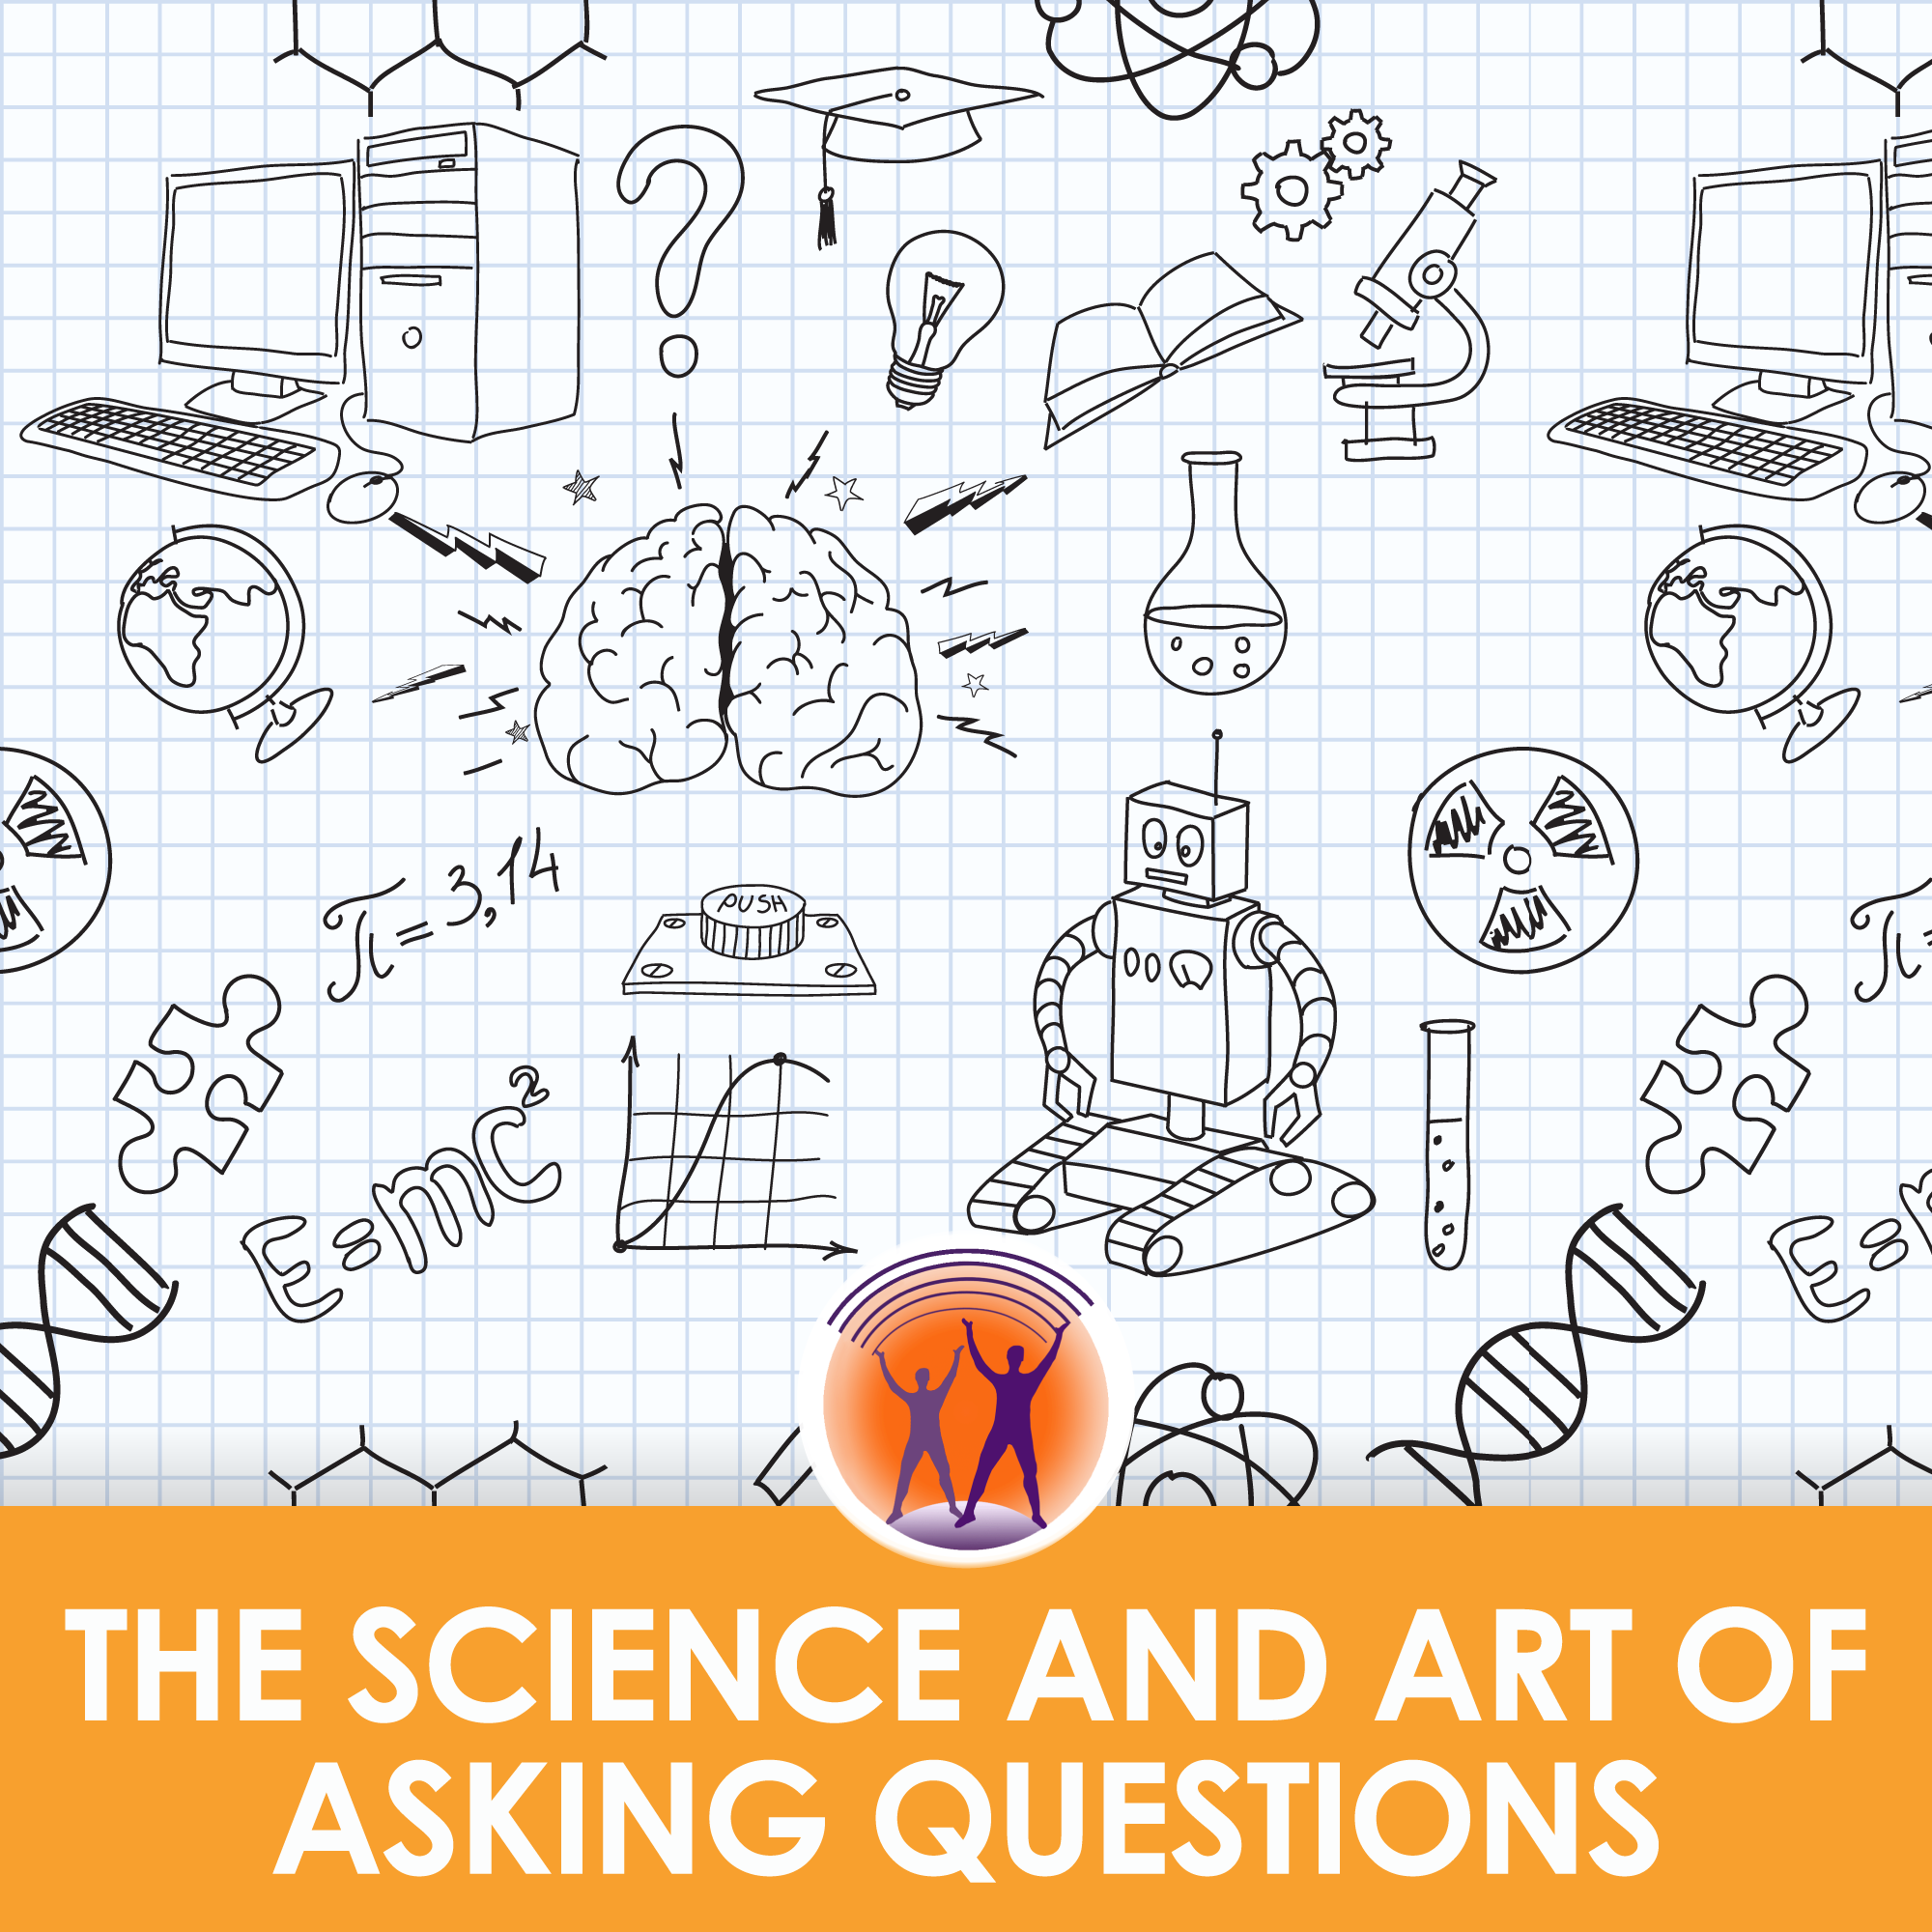 The Science and Art of Asking Questions